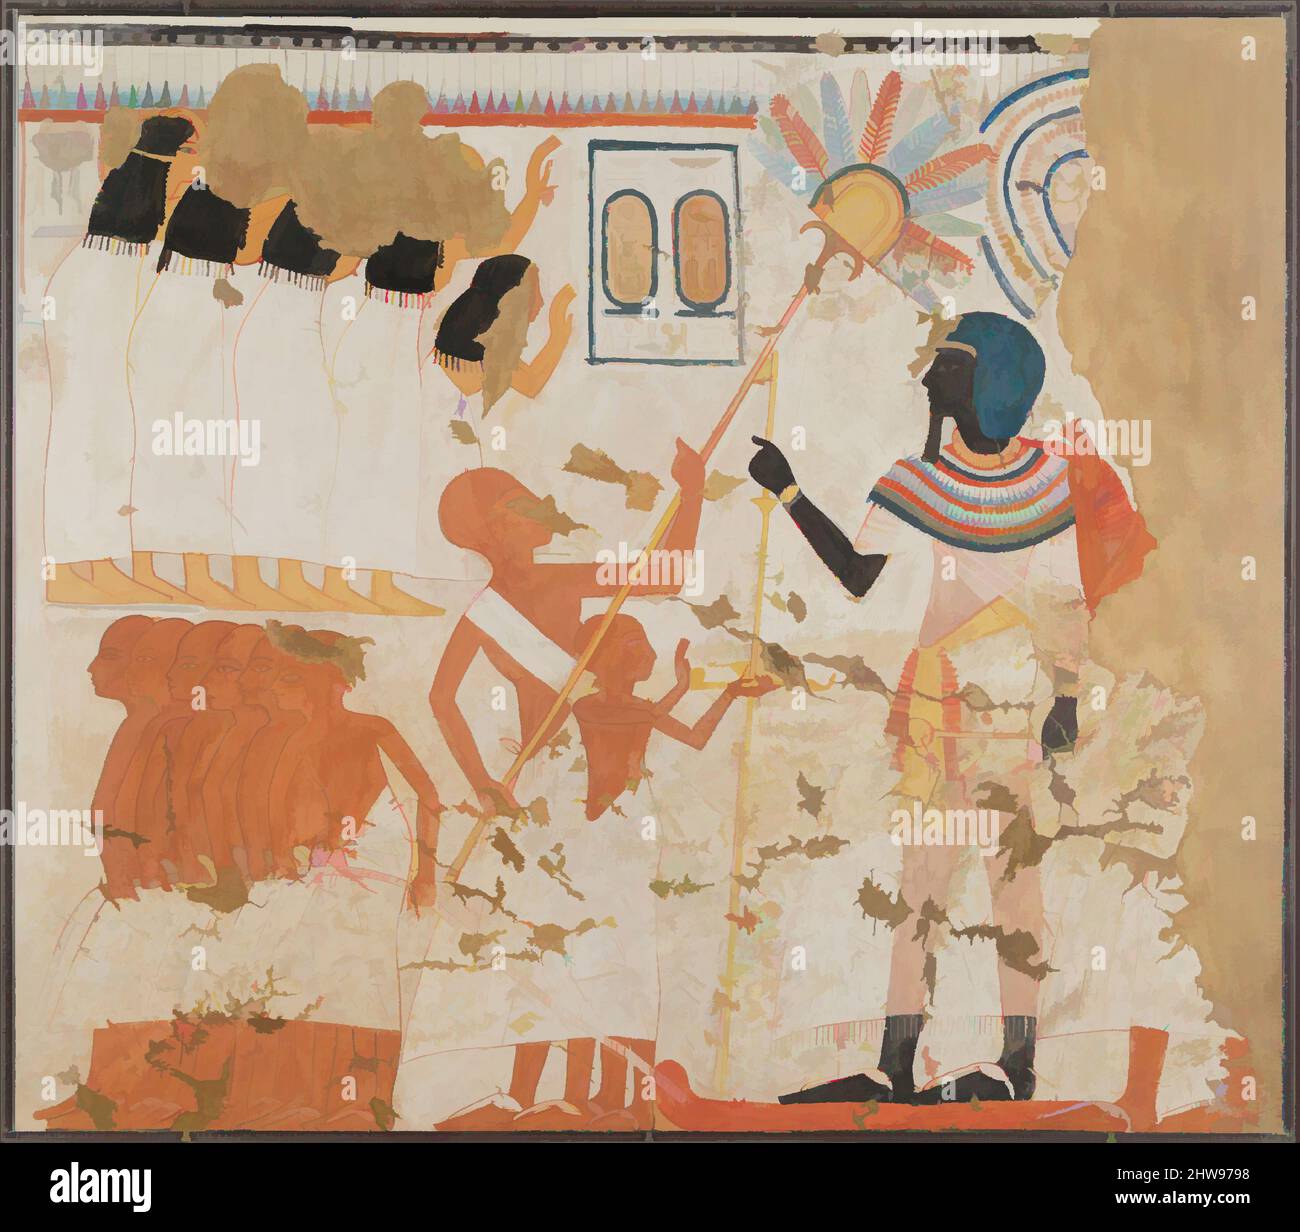 Art inspired by Dragging a Statue of Thutmose I, New Kingdom, Ramesside, Dynasty 19, ca. 1294–1279 B.C., From Egypt, Upper Egypt, Thebes, Tempera on paper, Facsimile H. 64 x W. 75 cm (25 3/16 x 29 1/2 in.); Framed: H. 67.9 x W. 76.8 cm (26 3/4 x 30 1/4 in.); Scale. 1:1, Norman de Garis, Classic works modernized by Artotop with a splash of modernity. Shapes, color and value, eye-catching visual impact on art. Emotions through freedom of artworks in a contemporary way. A timeless message pursuing a wildly creative new direction. Artists turning to the digital medium and creating the Artotop NFT Stock Photo